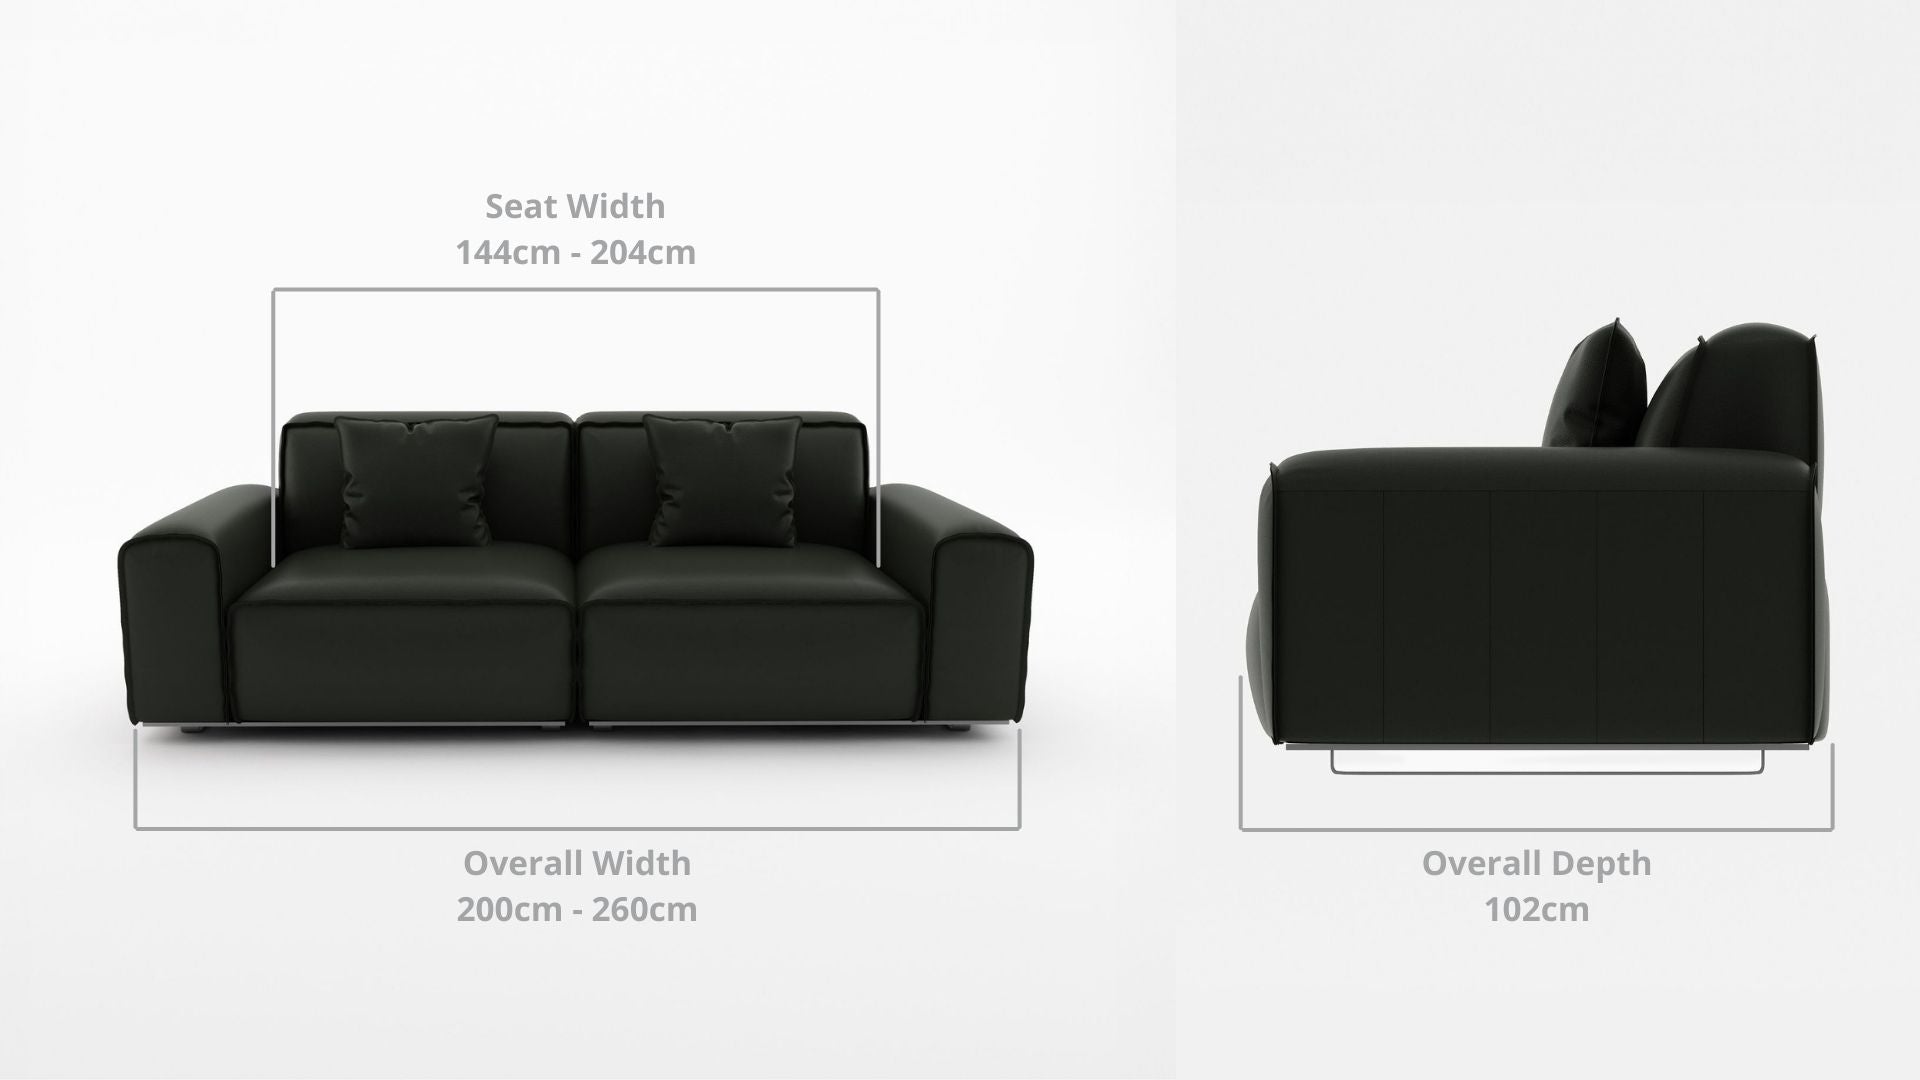 Details the key dimensions in terms of overall width, overall depth and seat width for Colby Full Leather Sofa